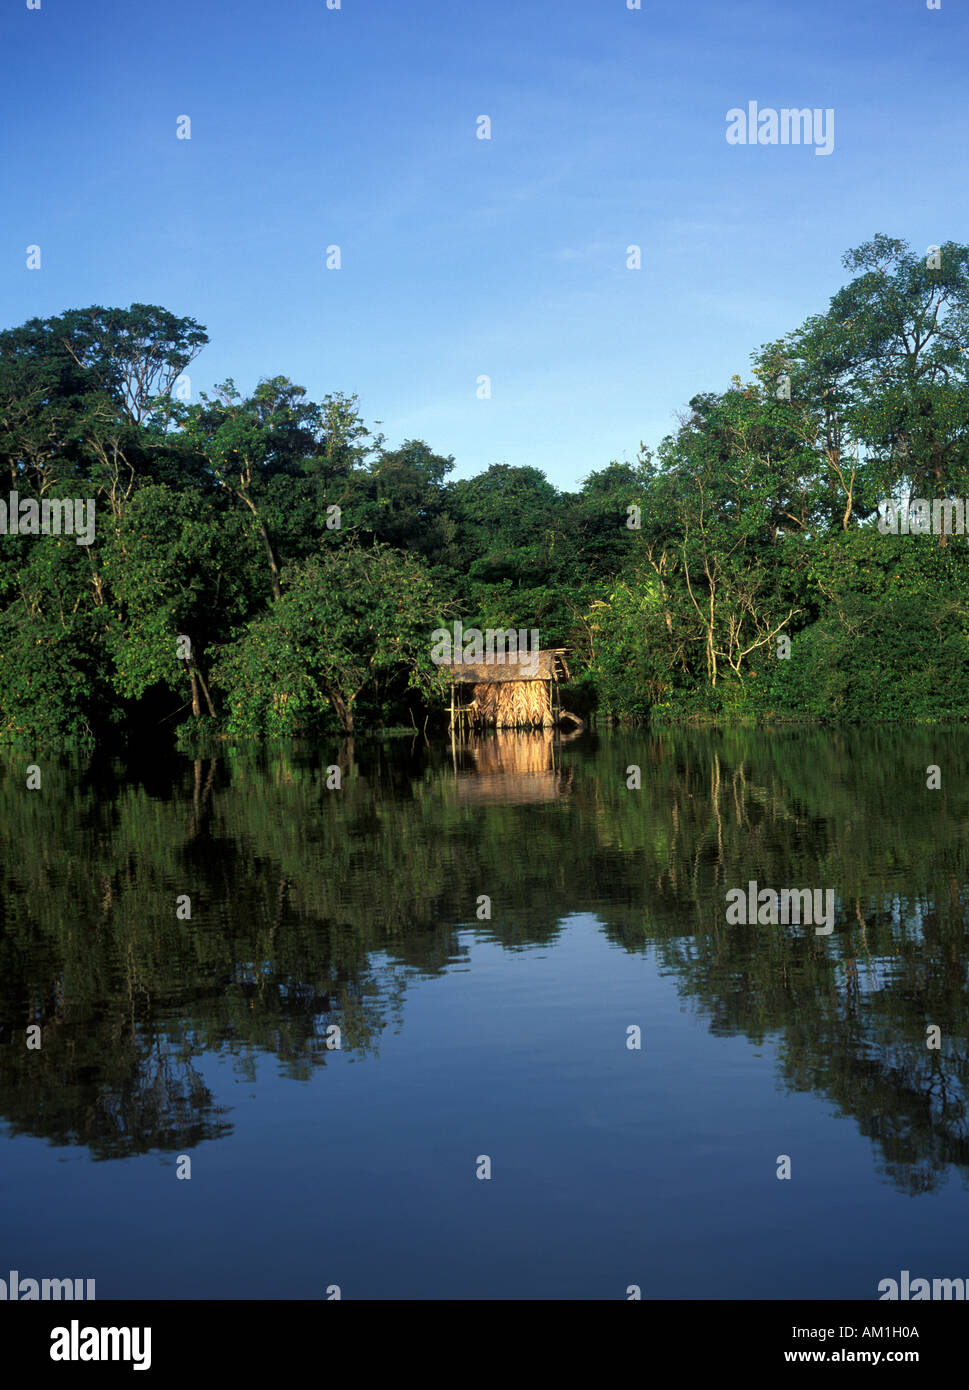 Warao House Native People of Orinoco Delta National Park Amidst Tropical Rainforest Stock Photo